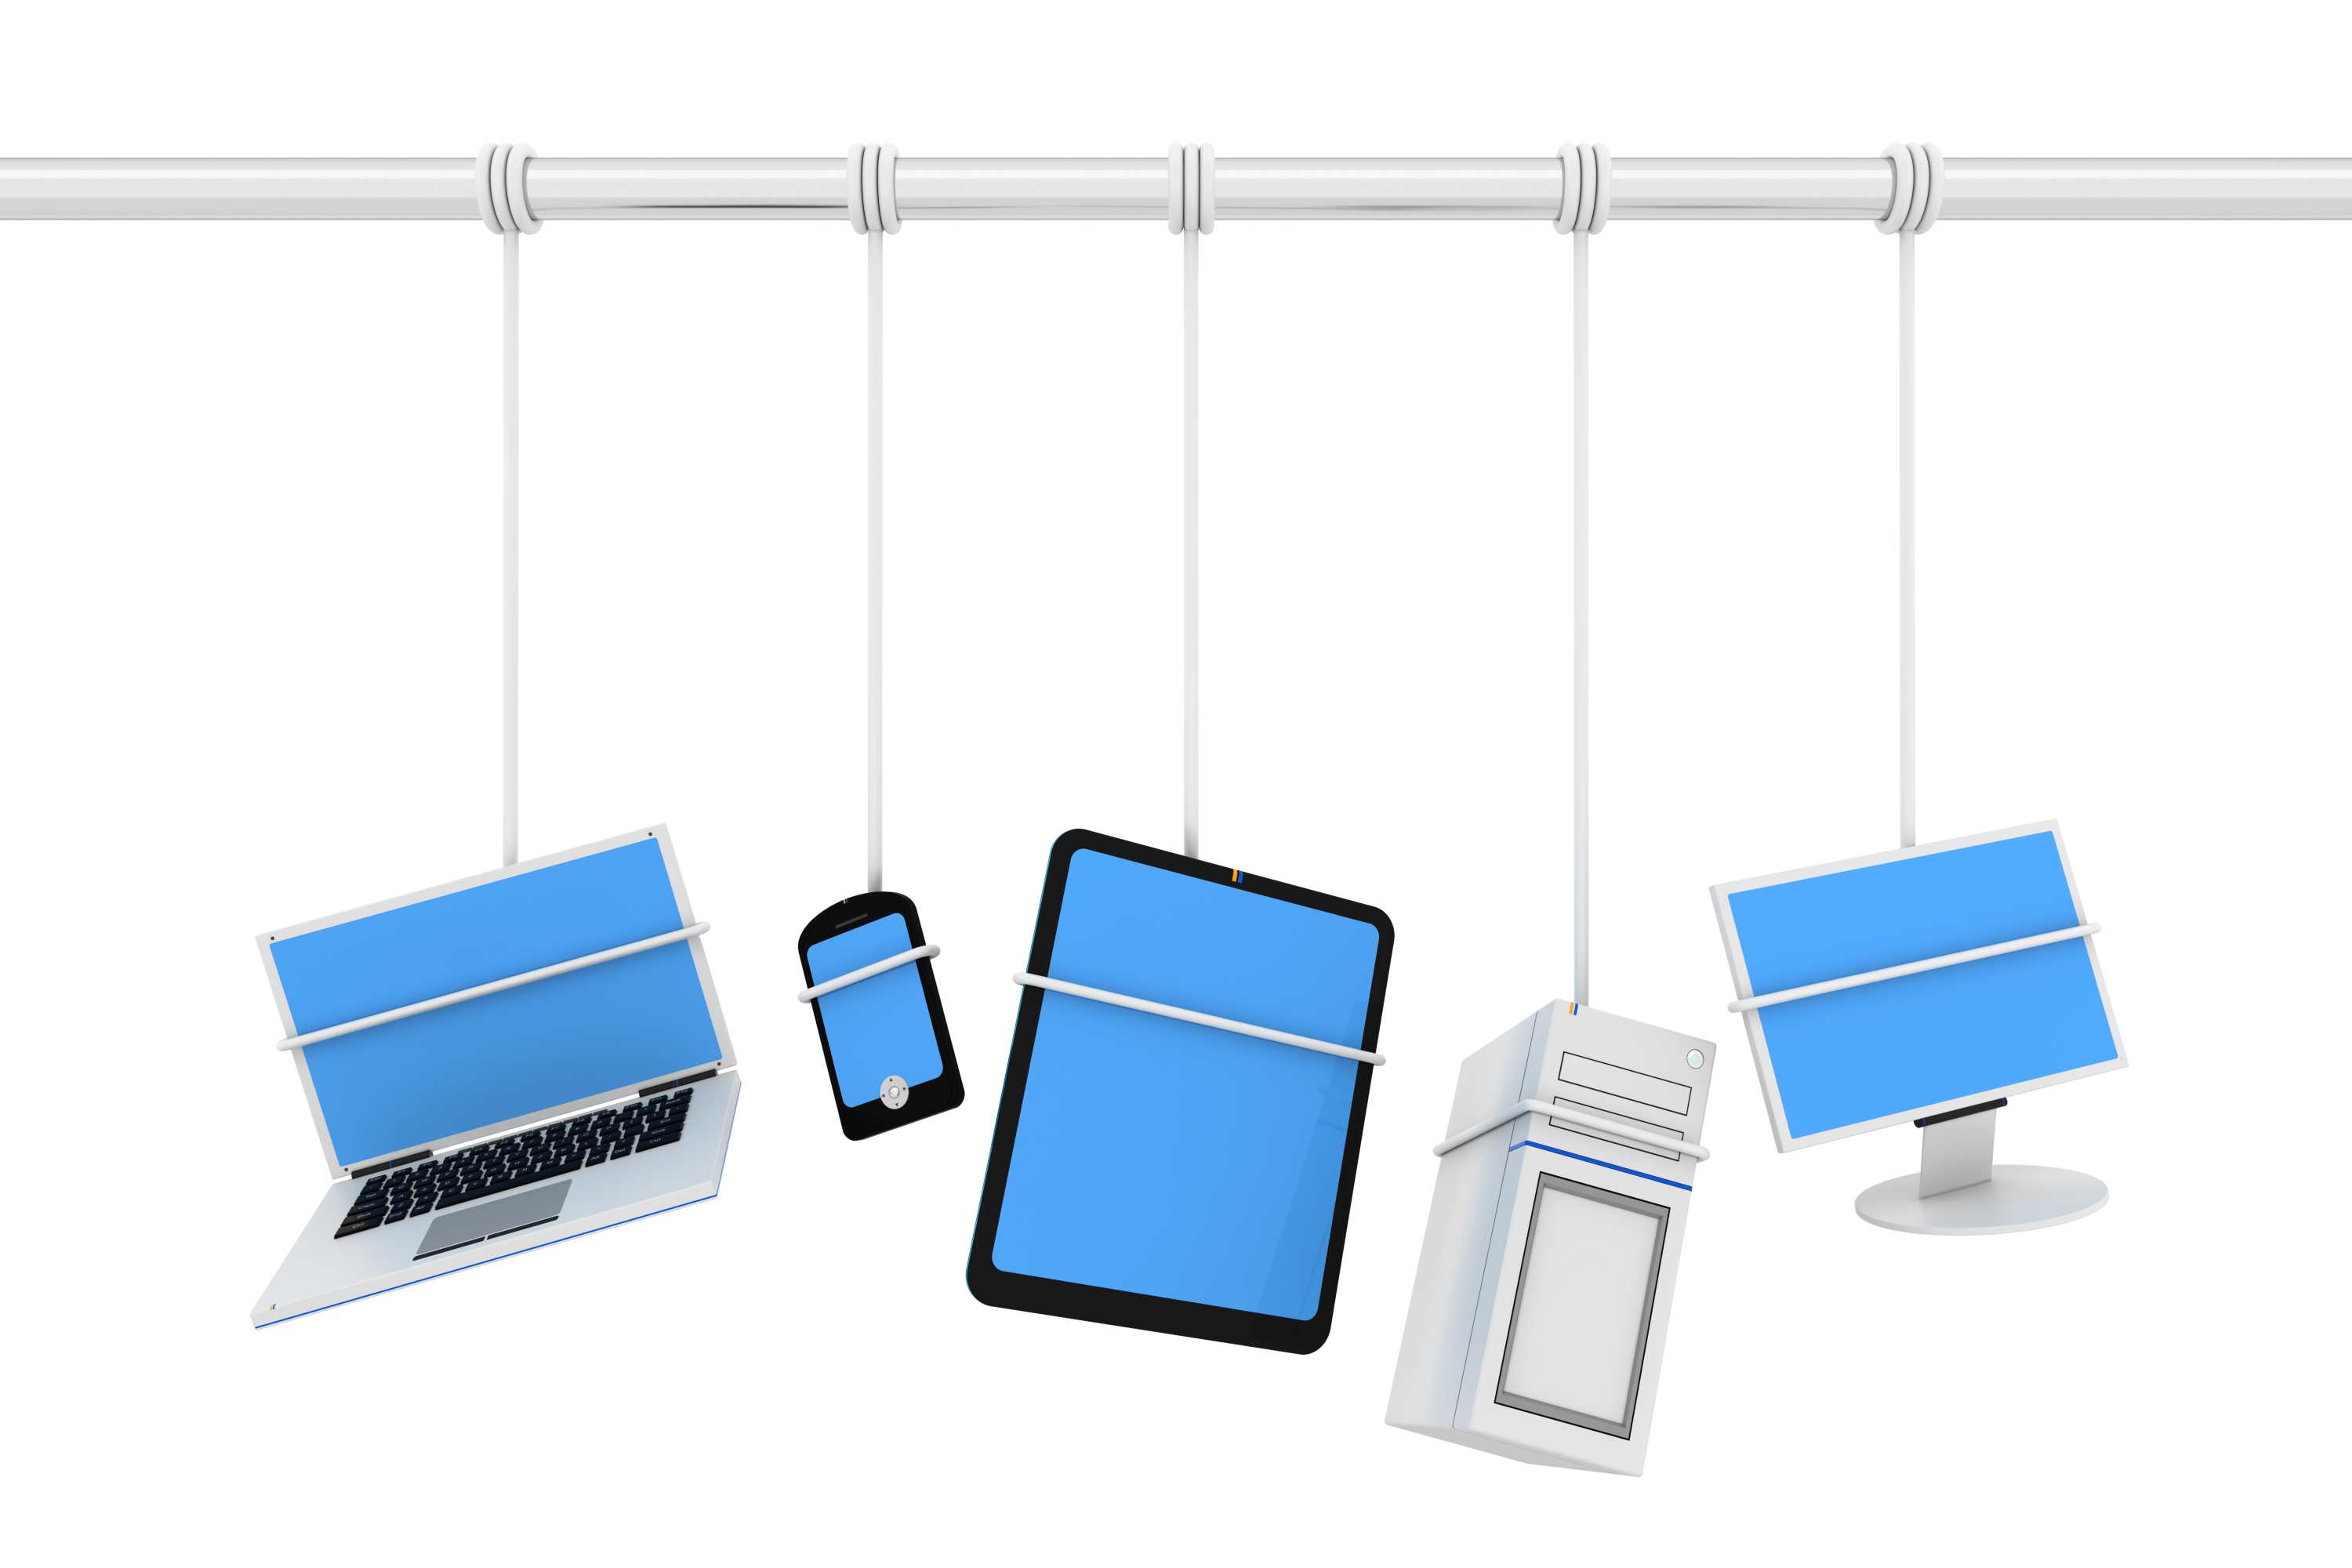 A group of electronic devices suspended by a string undergoes a windows 10 migration.